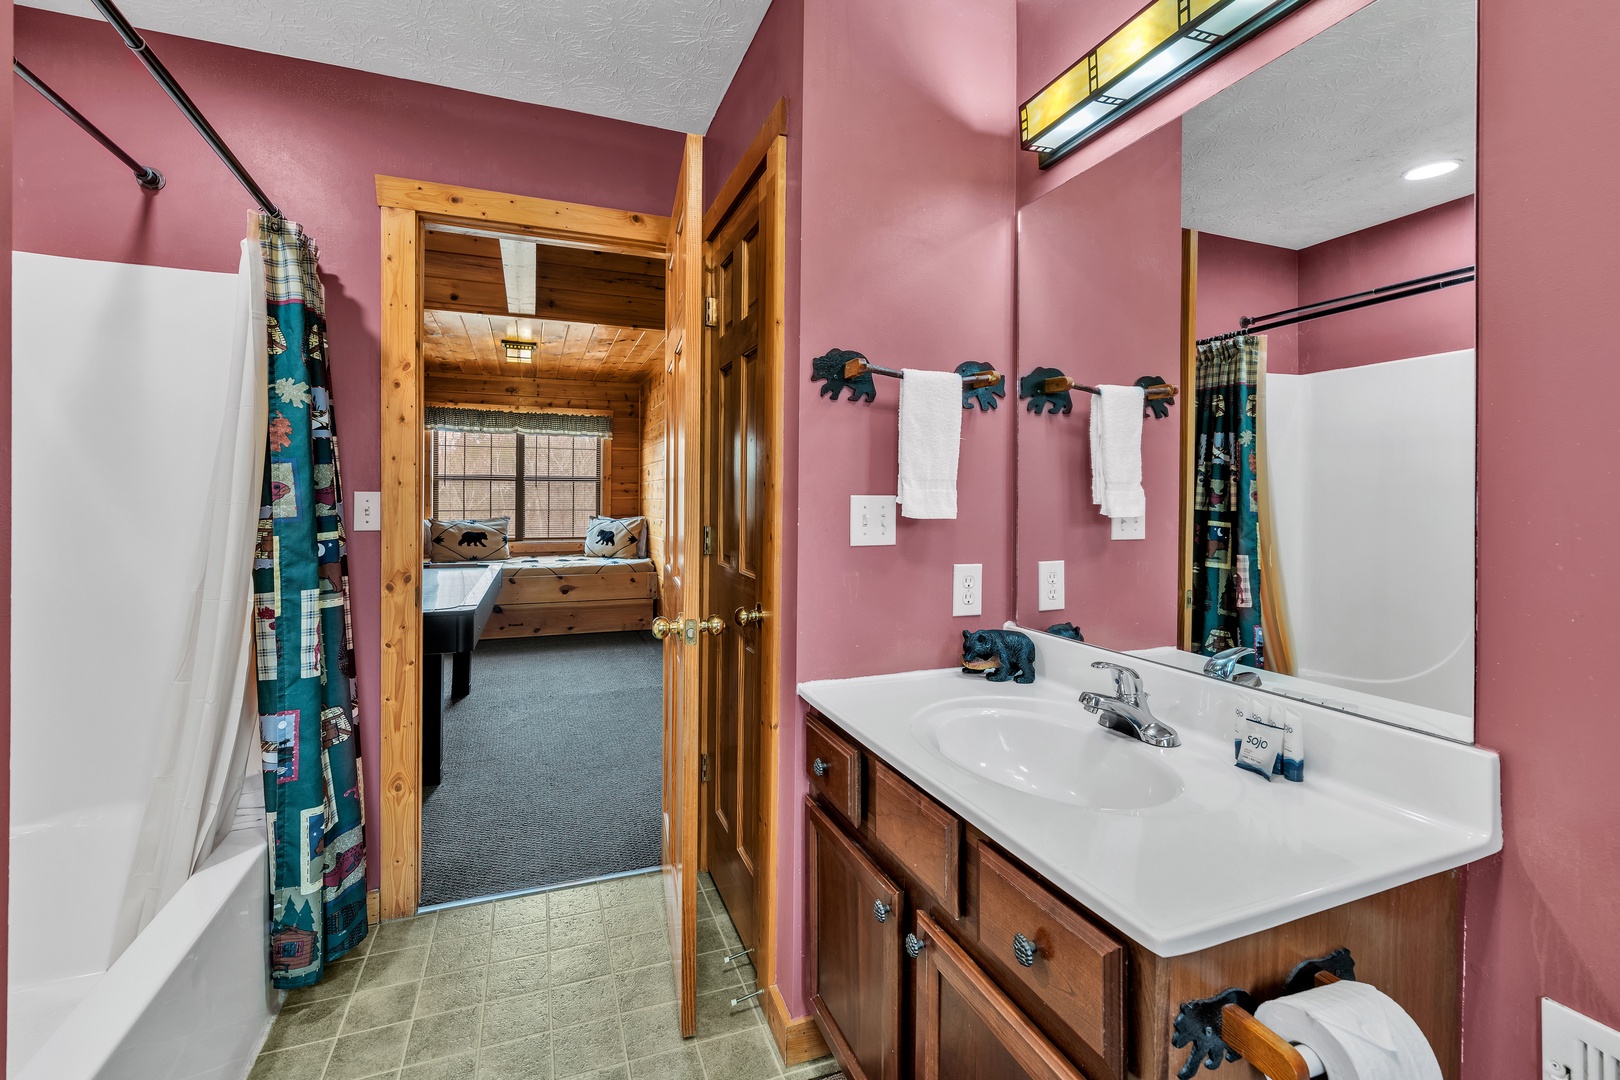 The loft’s full bathroom features a single vanity & shower/tub combo